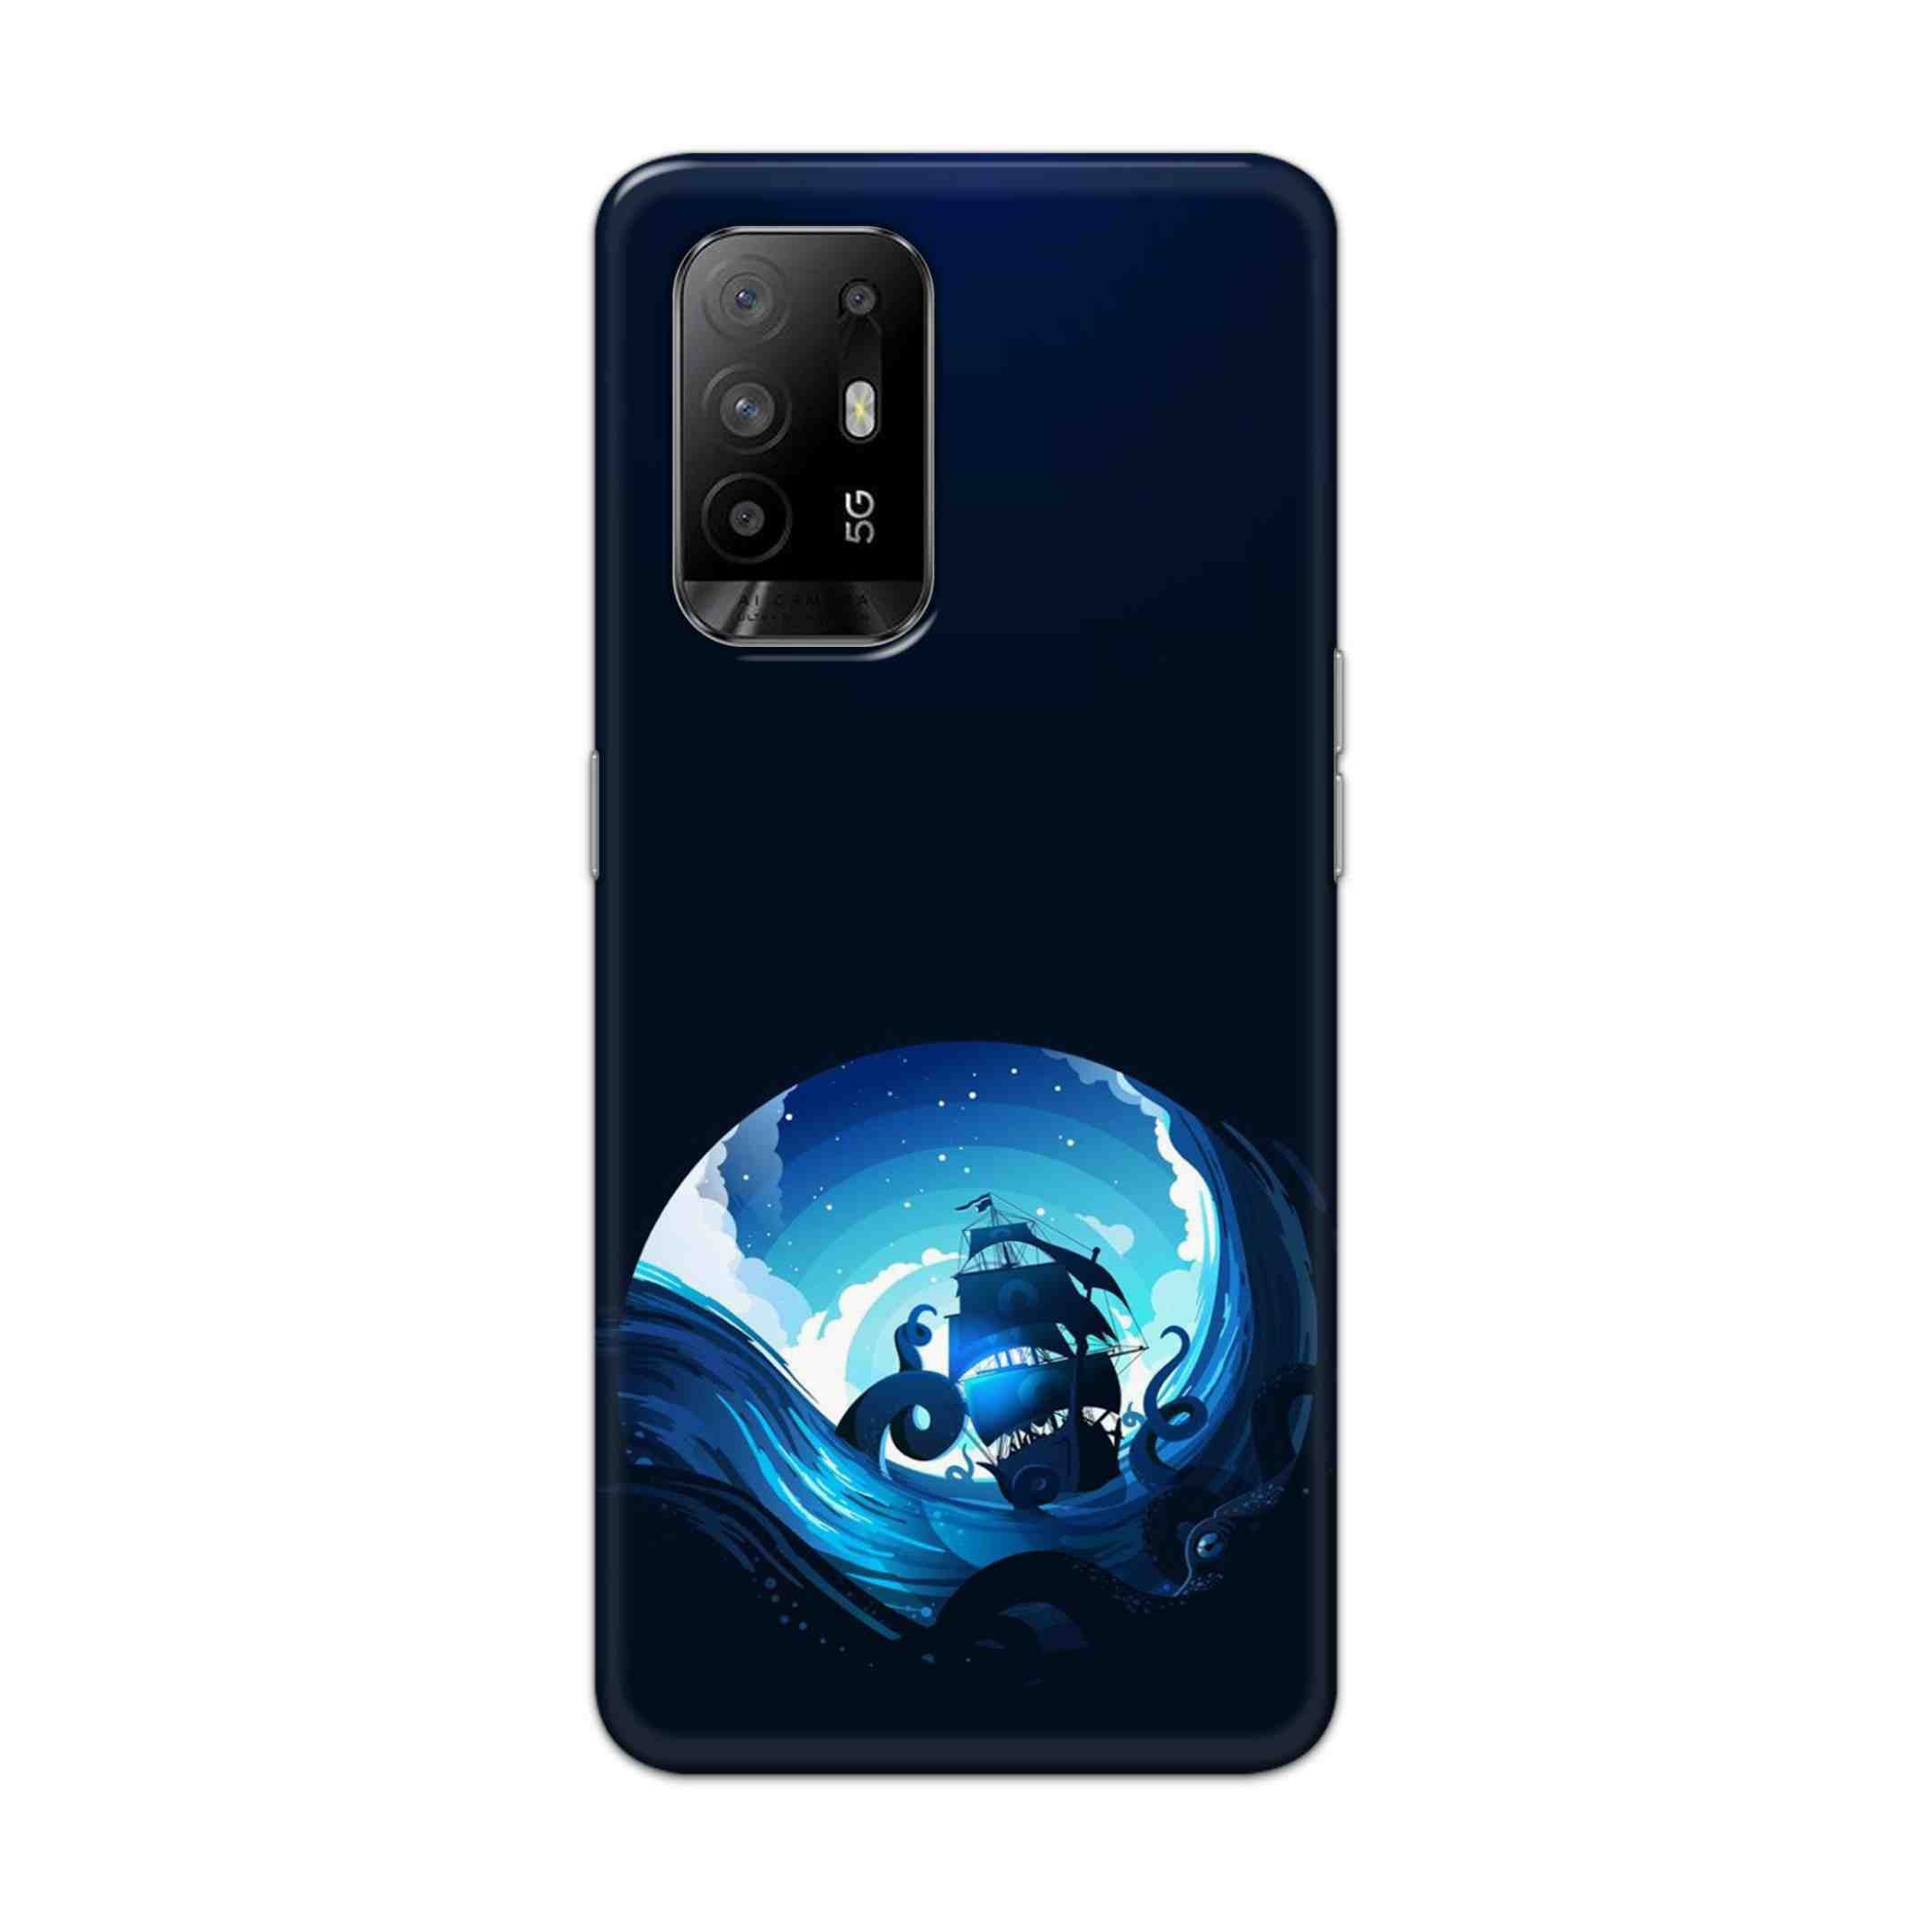 Buy Blue Sea Ship Hard Back Mobile Phone Case Cover For Oppo F19 Pro Plus Online